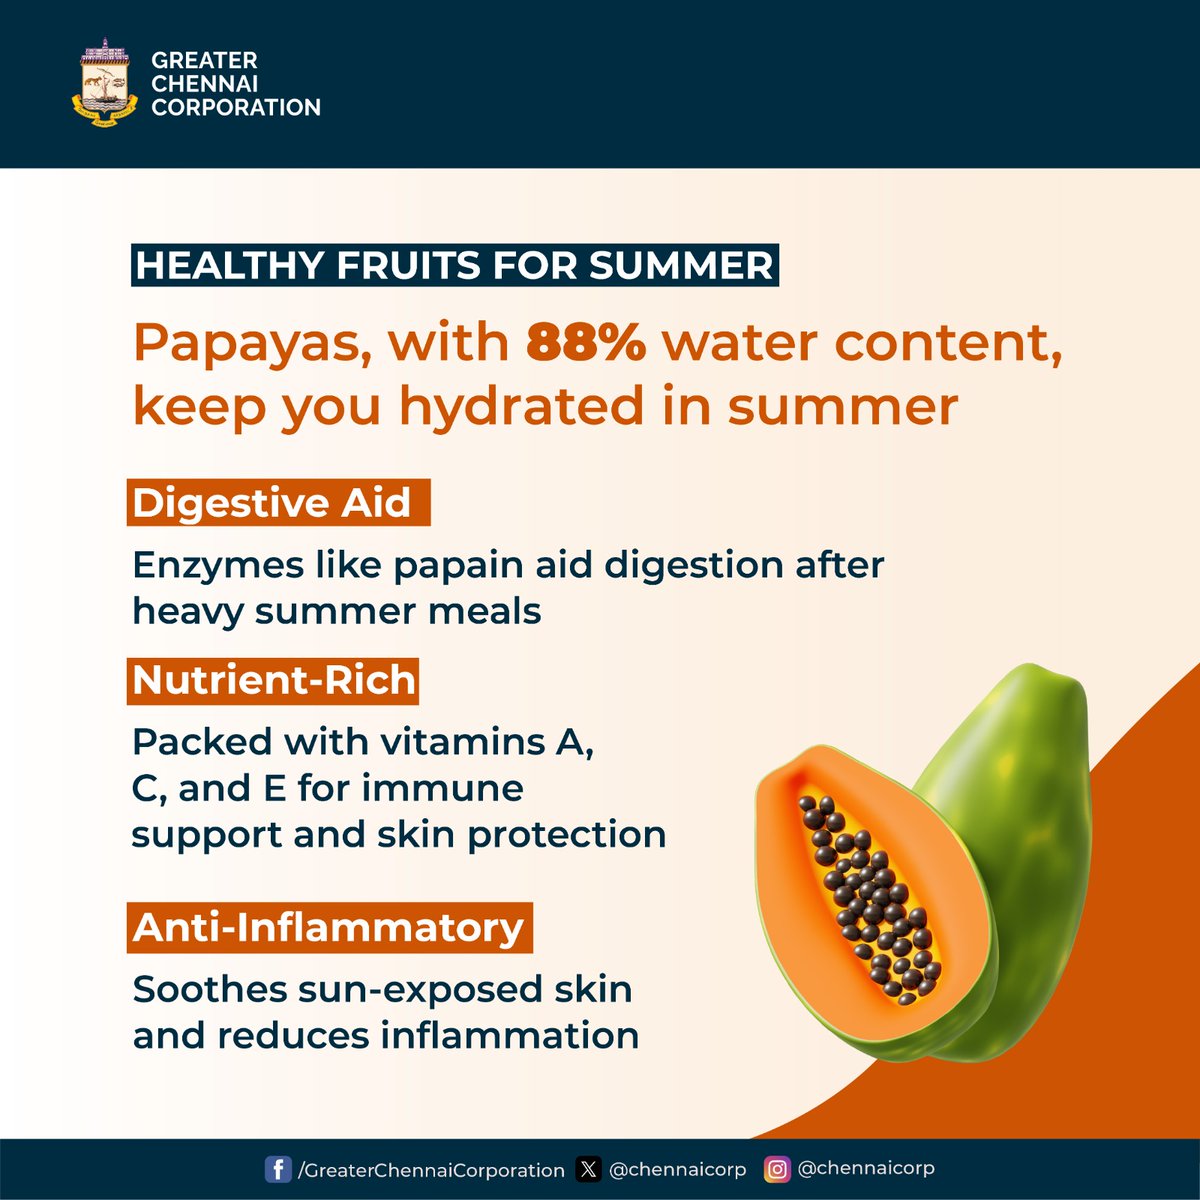 Dear Chennaiites, Stay refreshed this summer with papayas! Hydrate with their 88% water content, aid digestion with papain enzymes, and enjoy immune support and skin protection from their nutrient-rich vitamins. @RAKRI1 #ChennaiCorporation #HereToServe